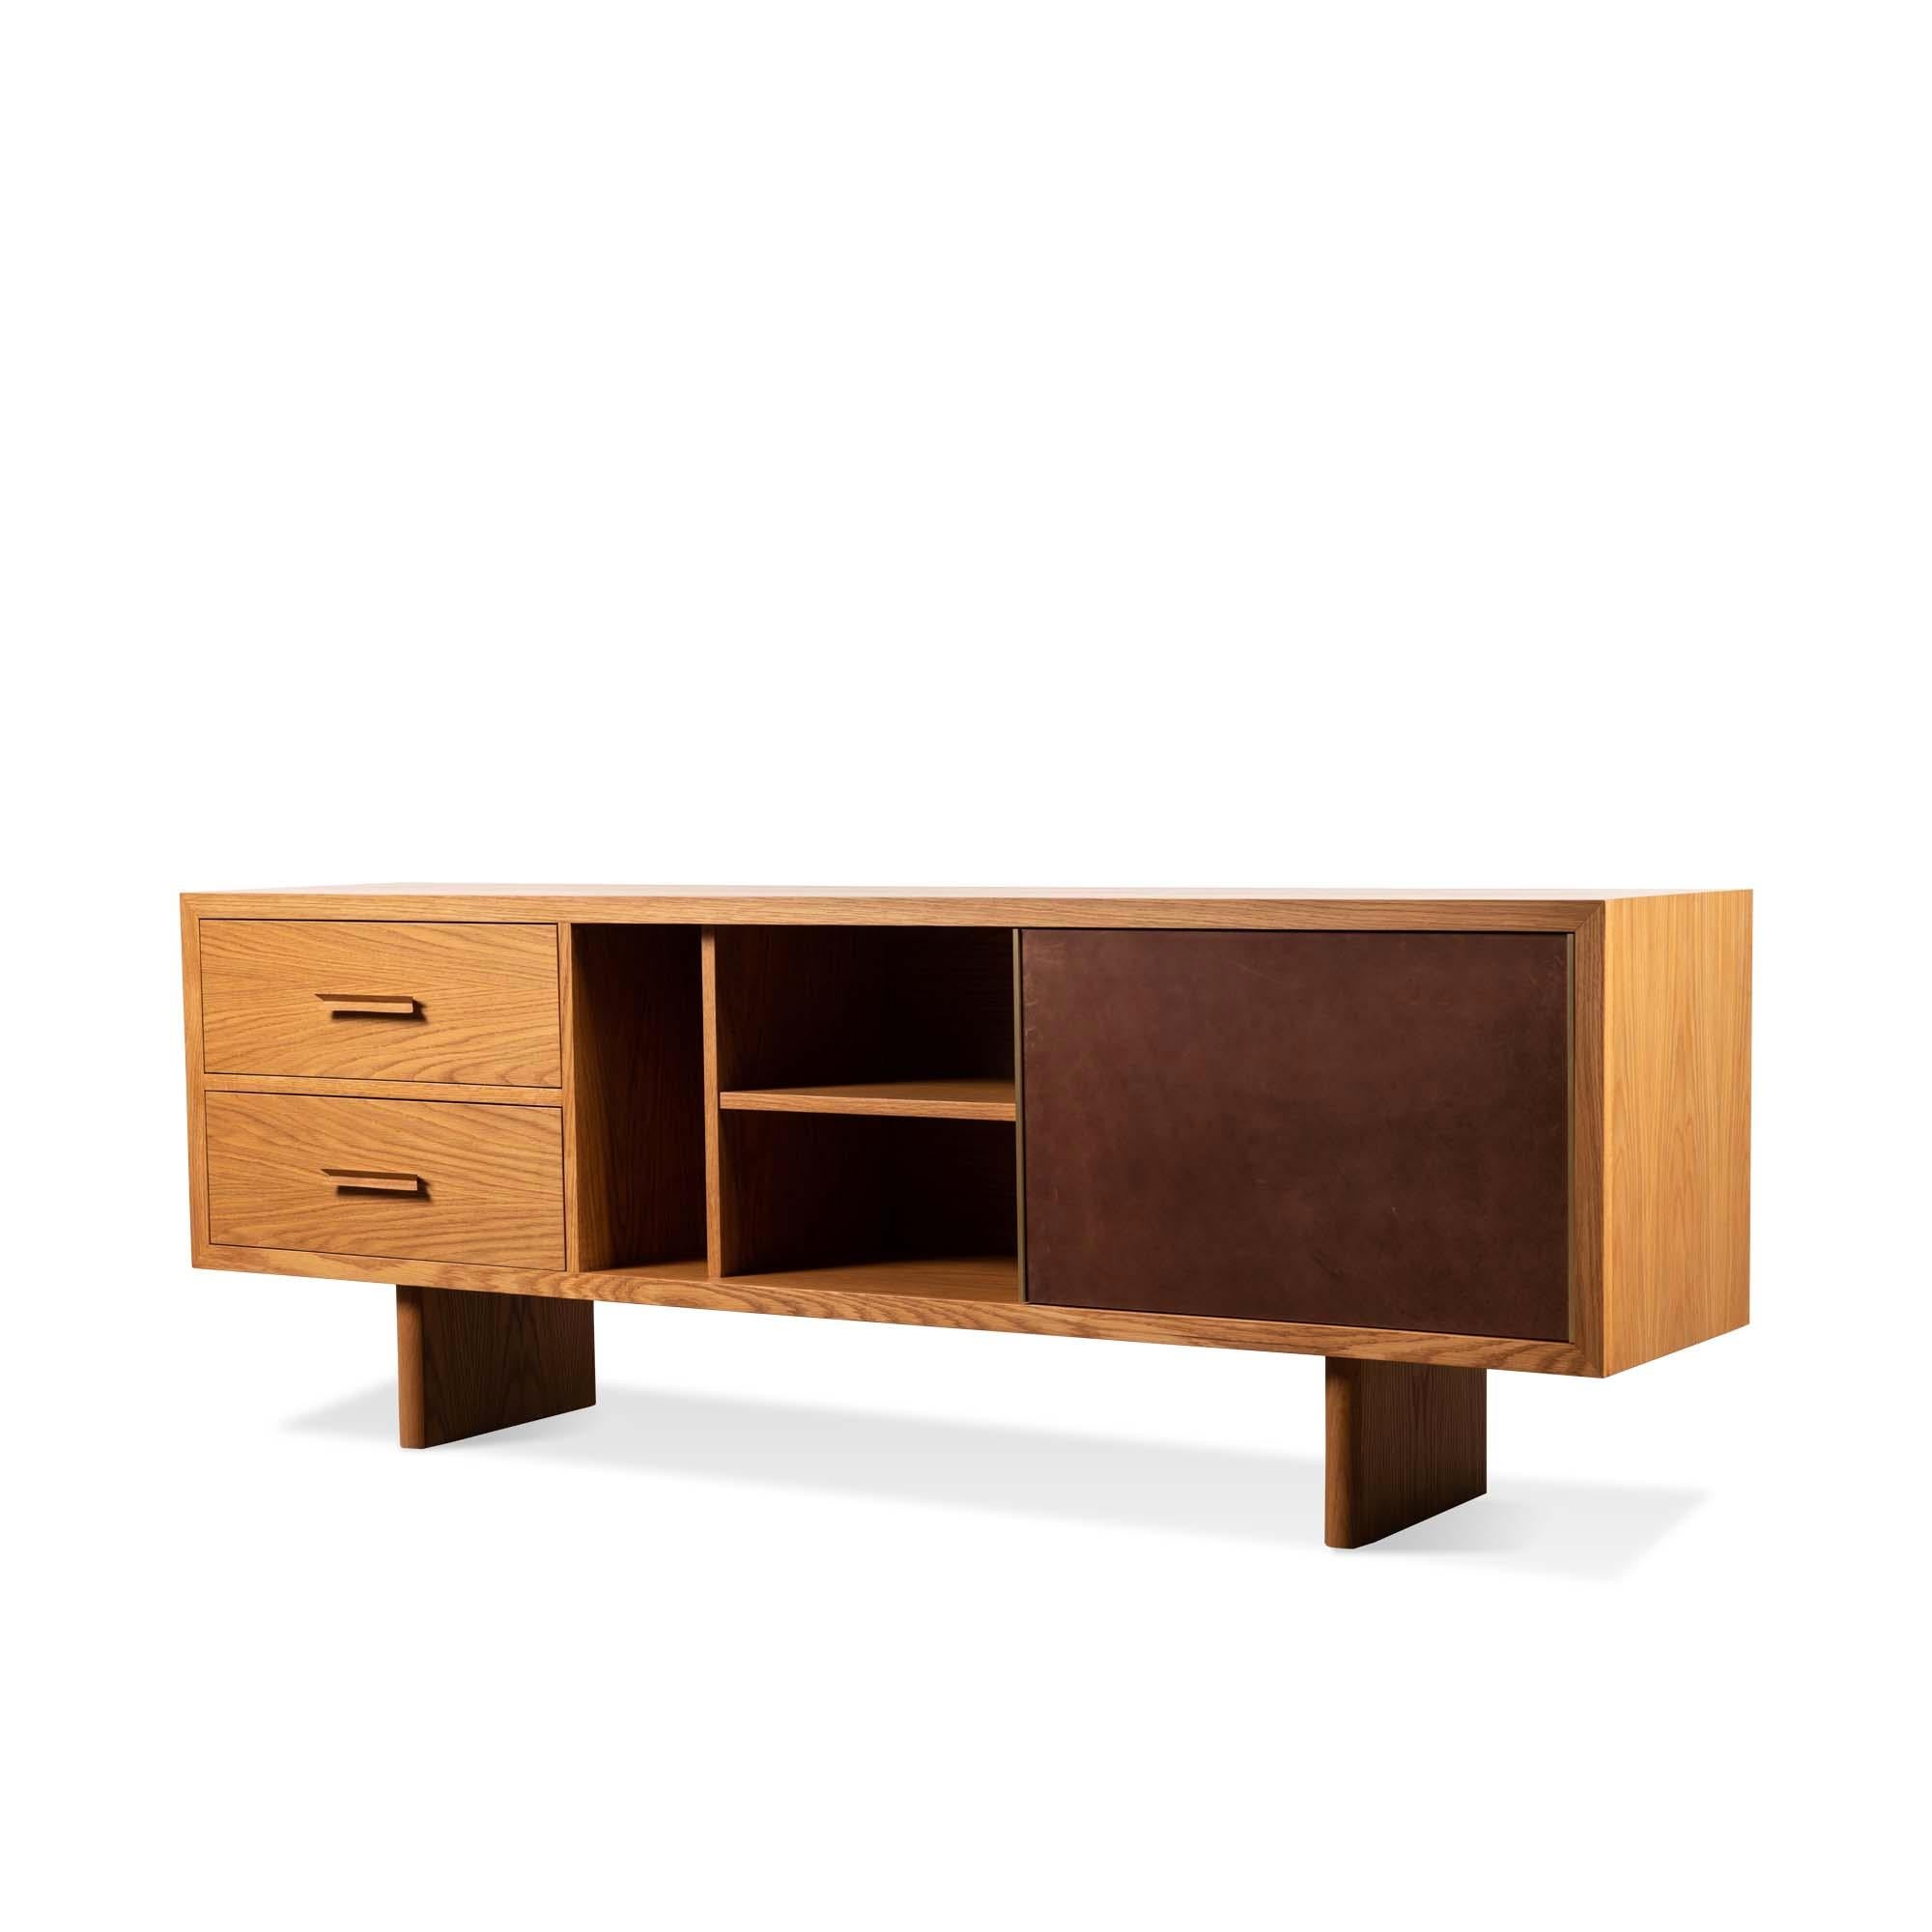 The inverness media cabinet features two drawers with solid carved handles, adjustable shelves, grommet holes and a sliding leather door with a solid brass handle. Available in American walnut or white oak. Wall-mounted version available. Specify at